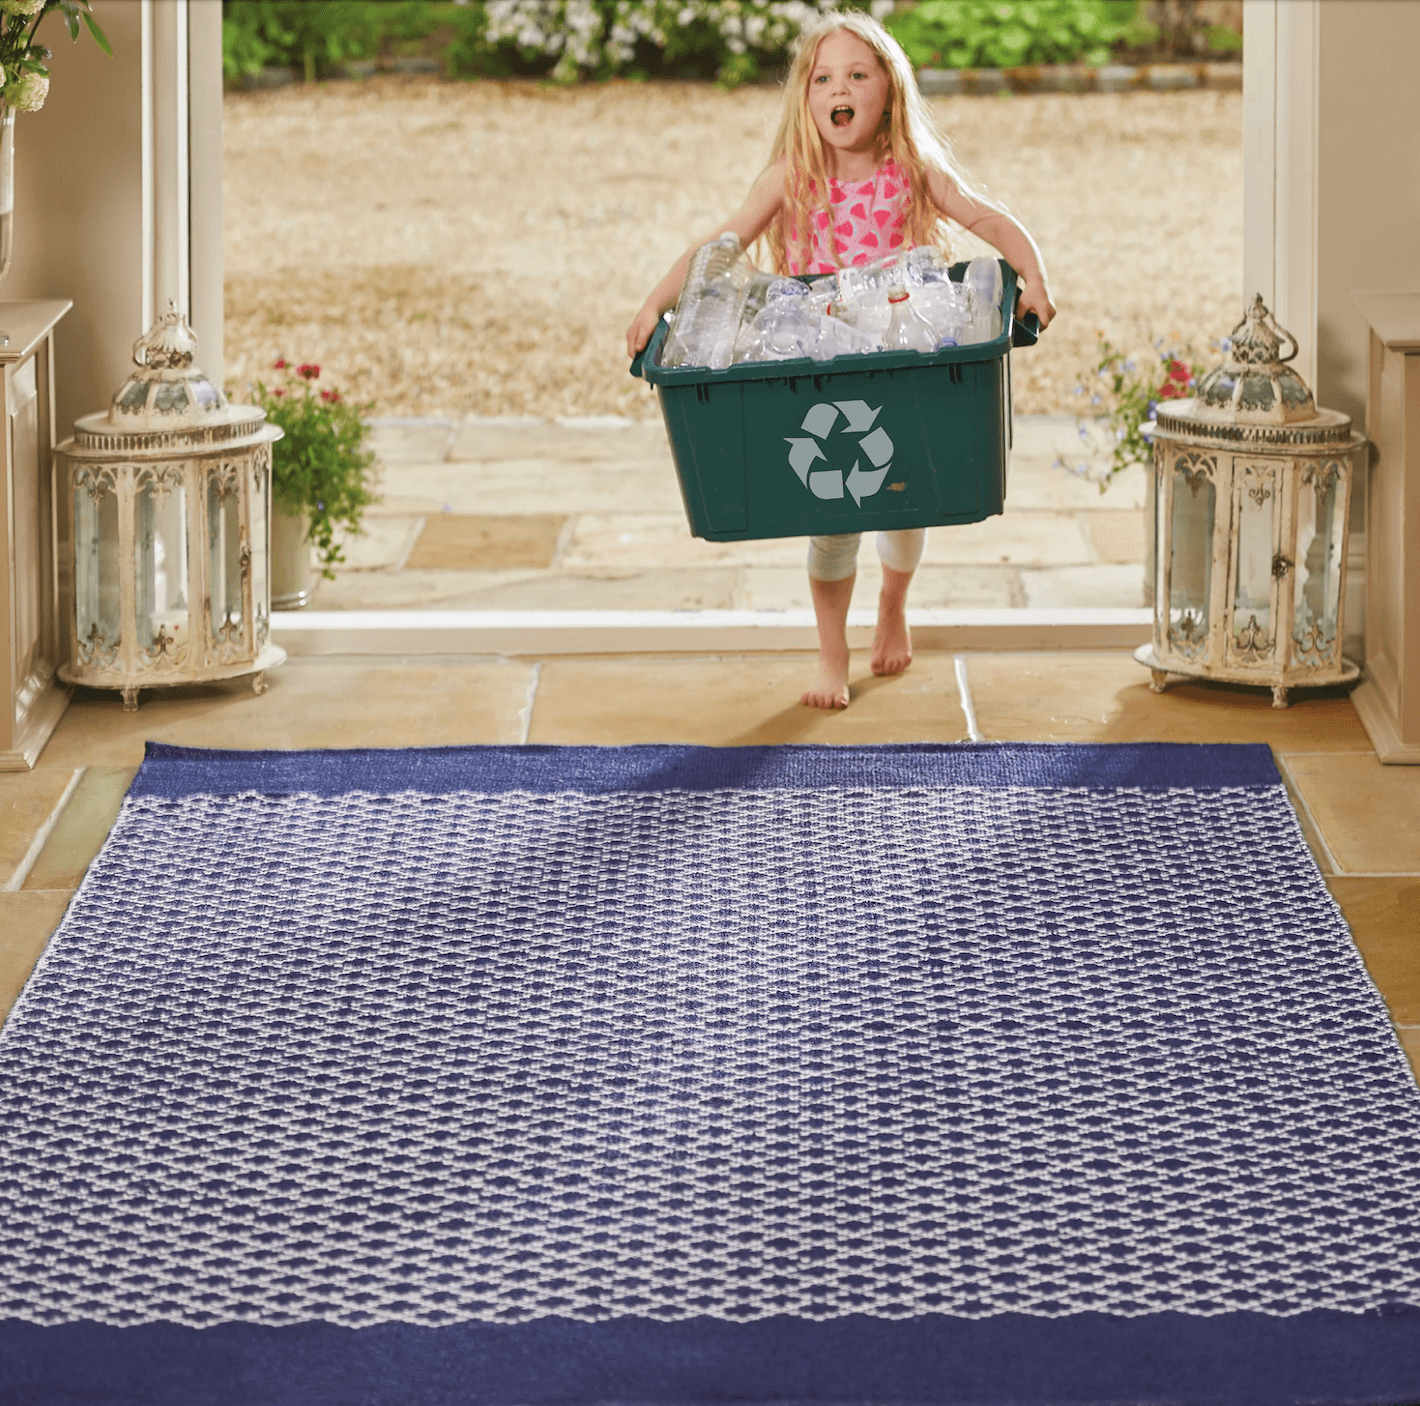 A young girl carrying a box over plastic bottles over a blue woven rug